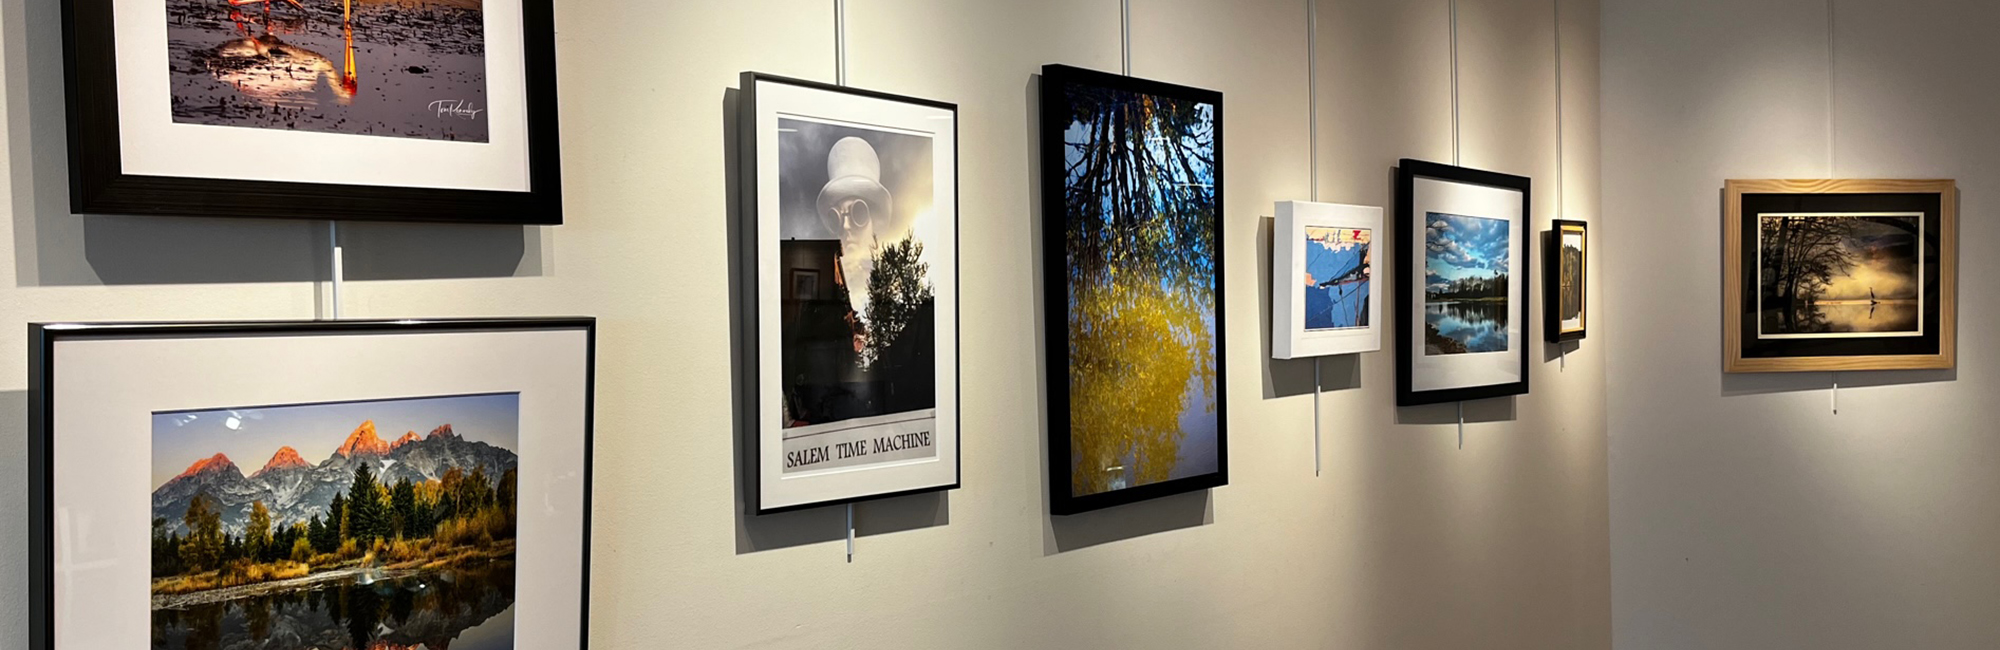 Featured in the Sisson Galleria / "Reflections" Photography Juried Show